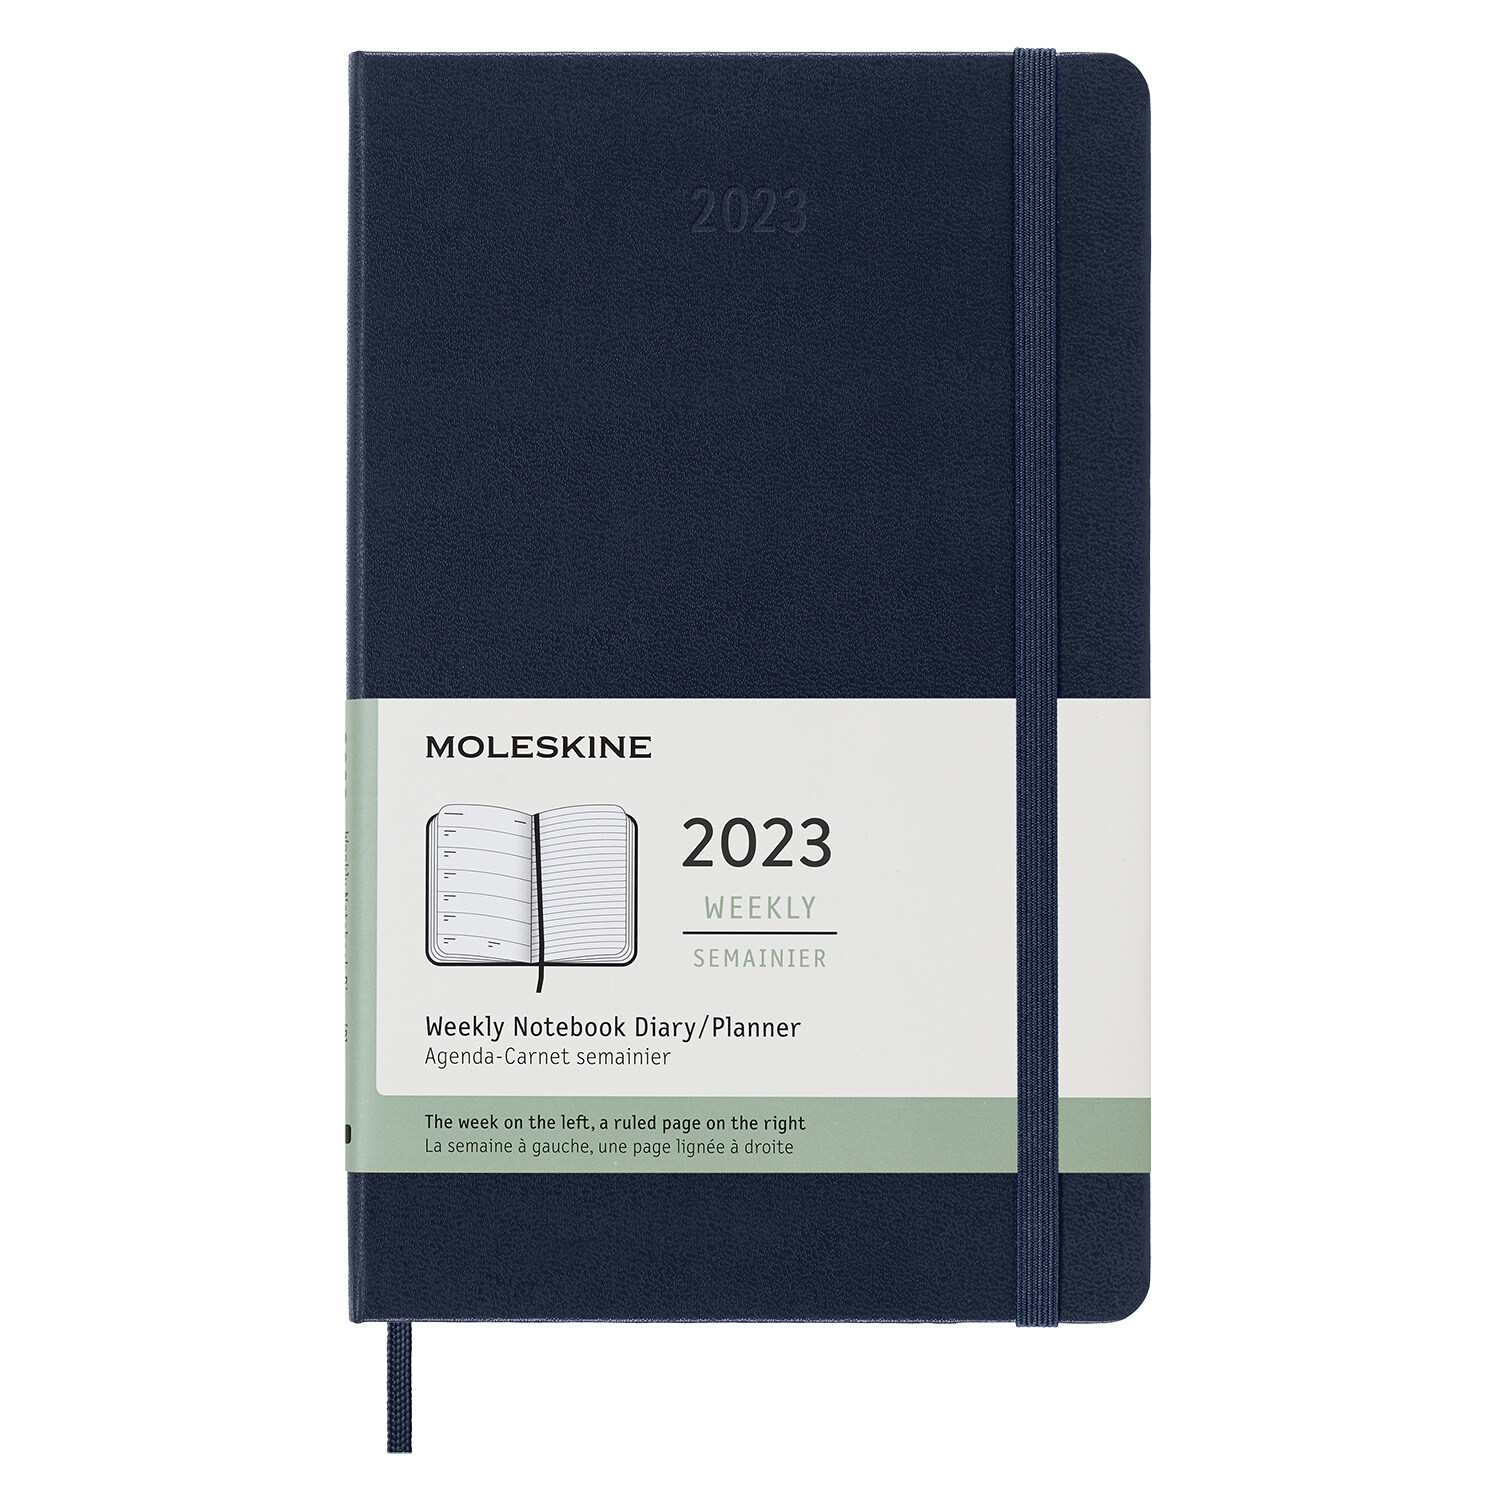 Moleskine 2023 Weekly Notebook Planner, 12m, Large, Saphire Blue, Hard Cover (5 X 8.25) (Other)